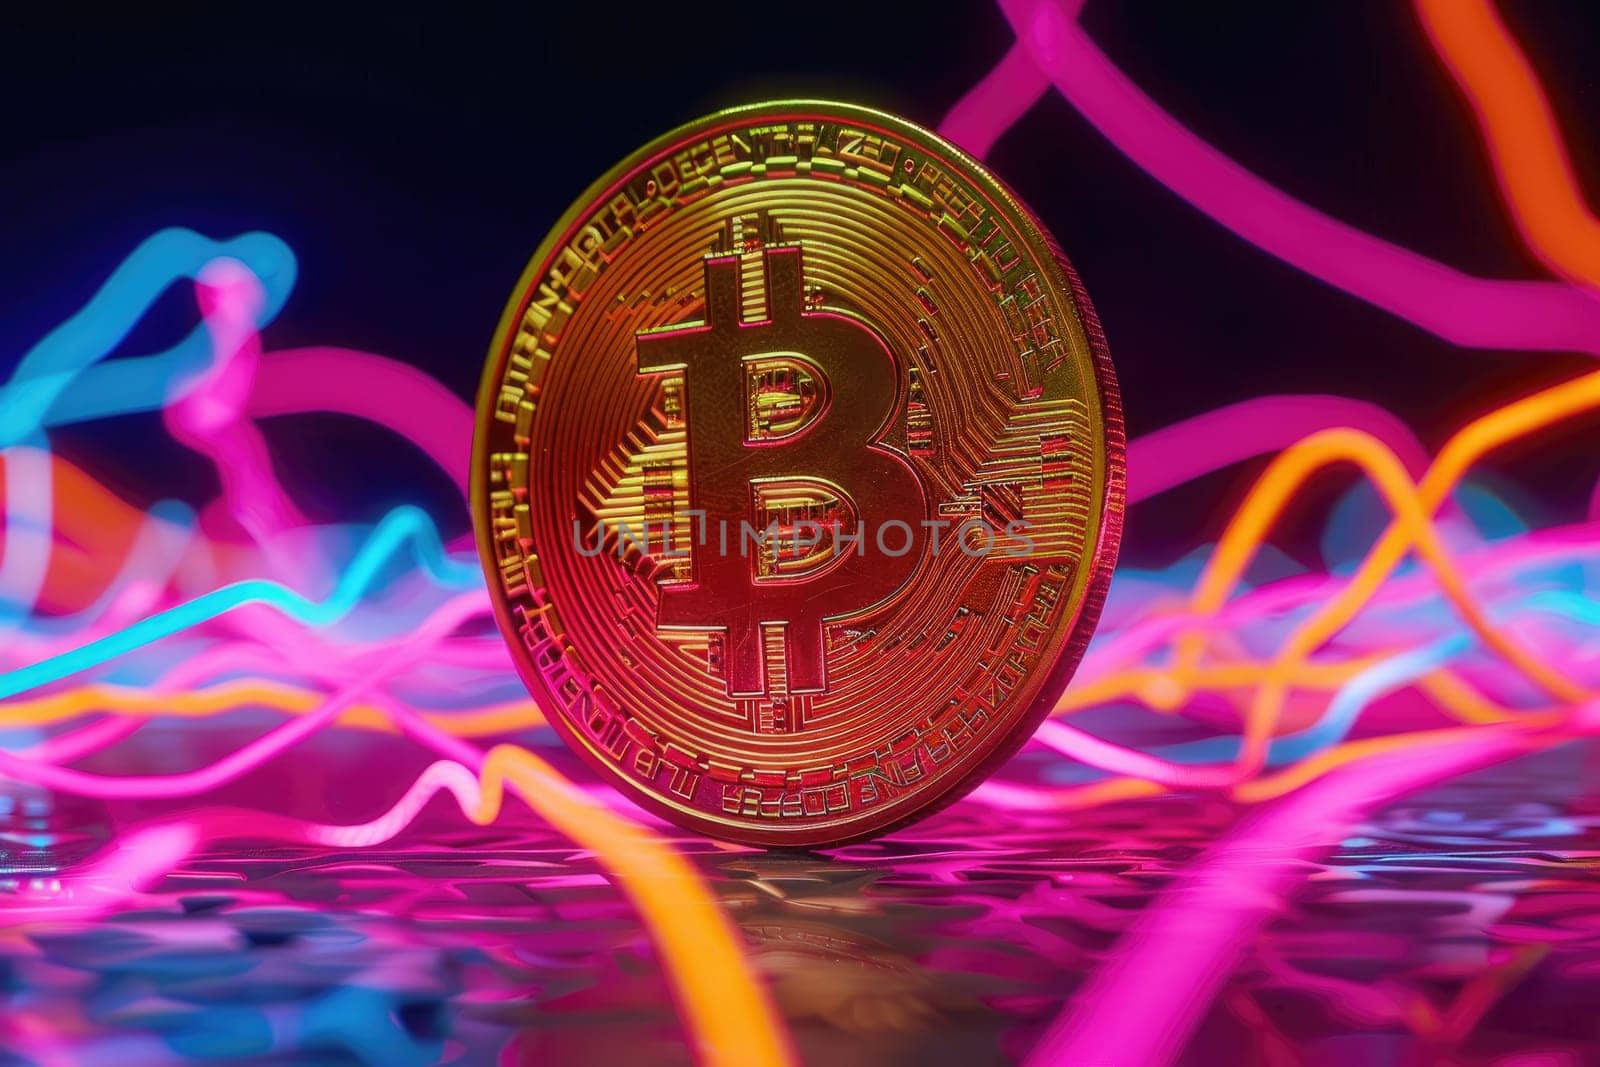 Bitcoin coin is cast in golden, the digital pulse of cryptocurrencies